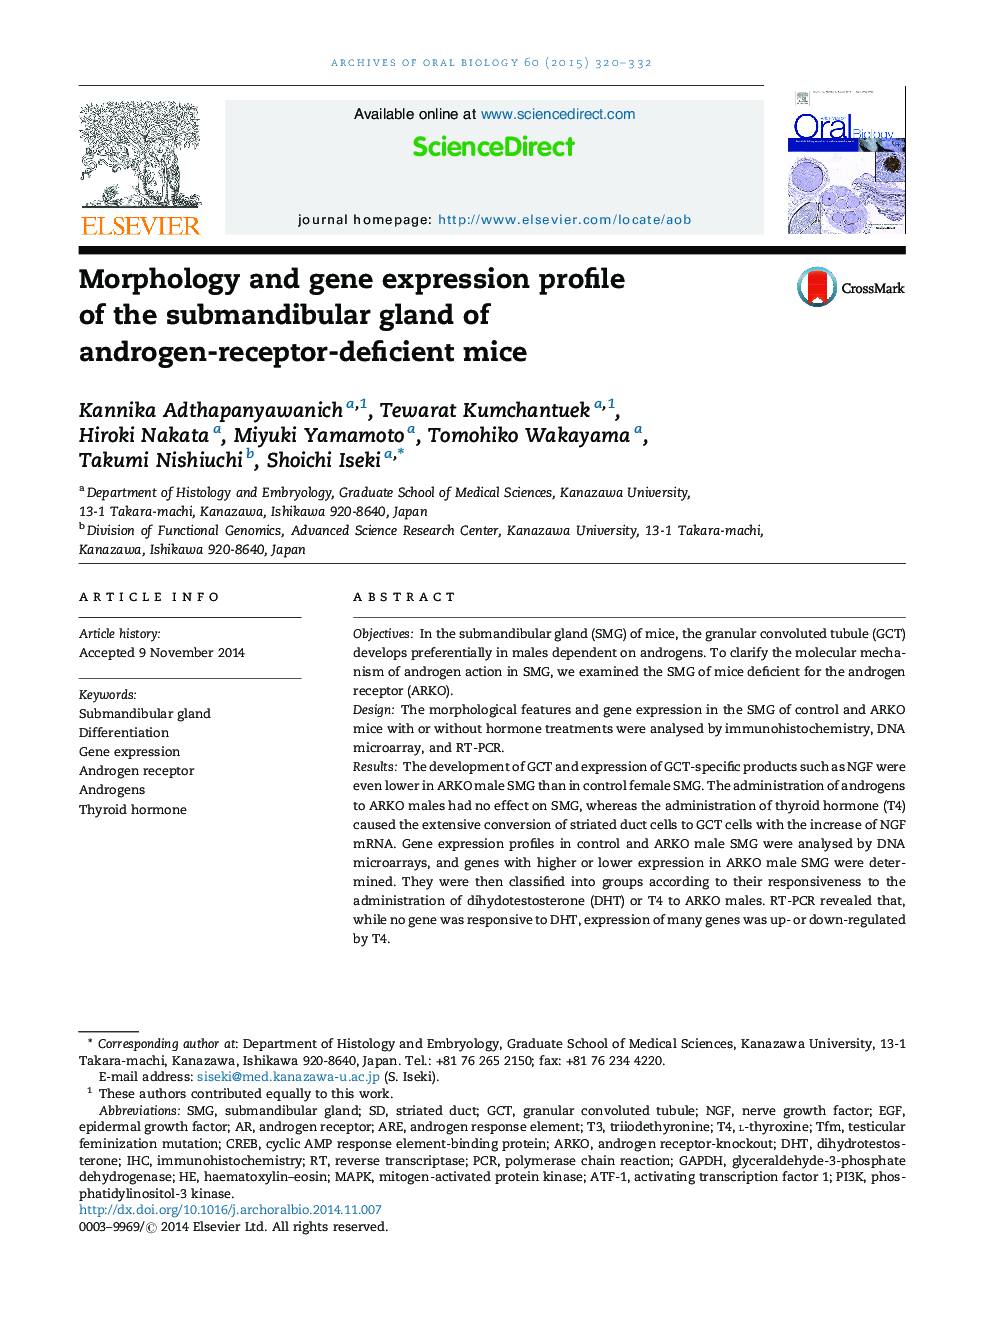 Morphology and gene expression profile of the submandibular gland of androgen-receptor-deficient mice